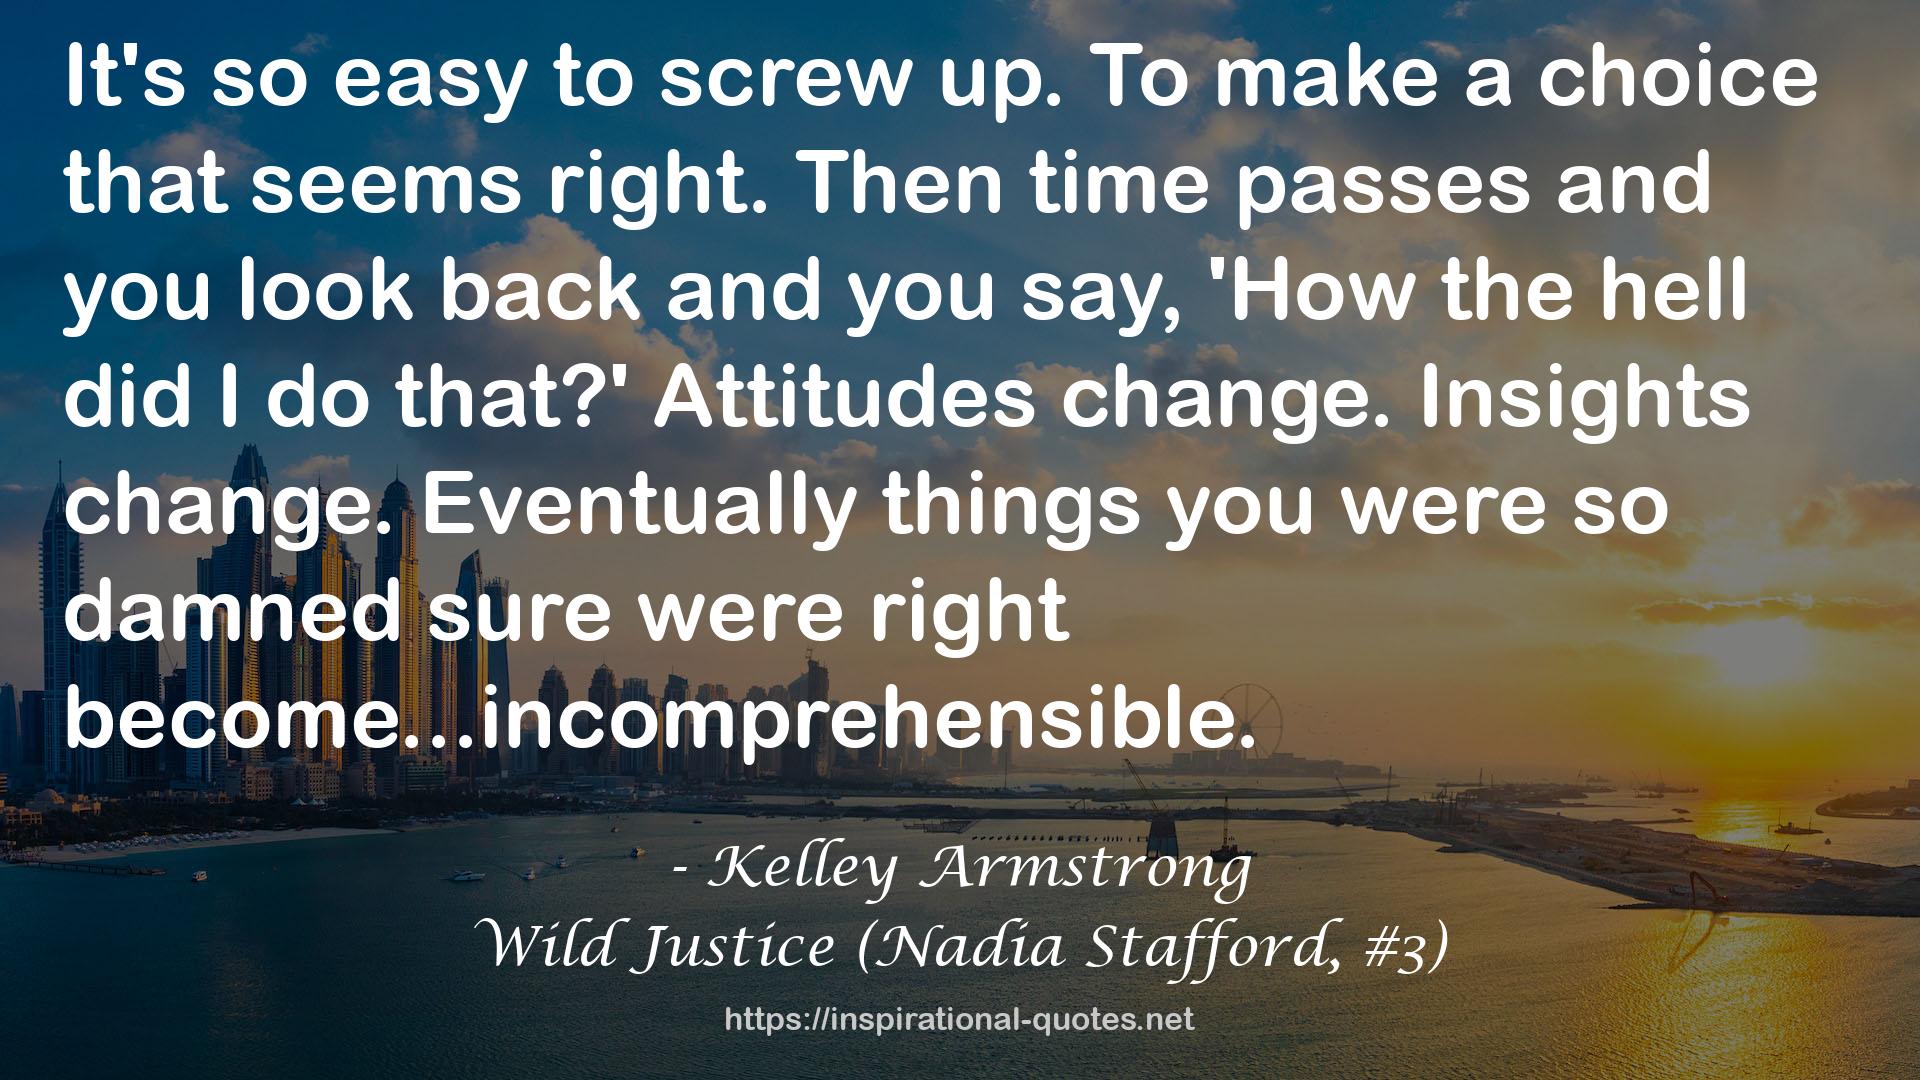 Wild Justice (Nadia Stafford, #3) QUOTES